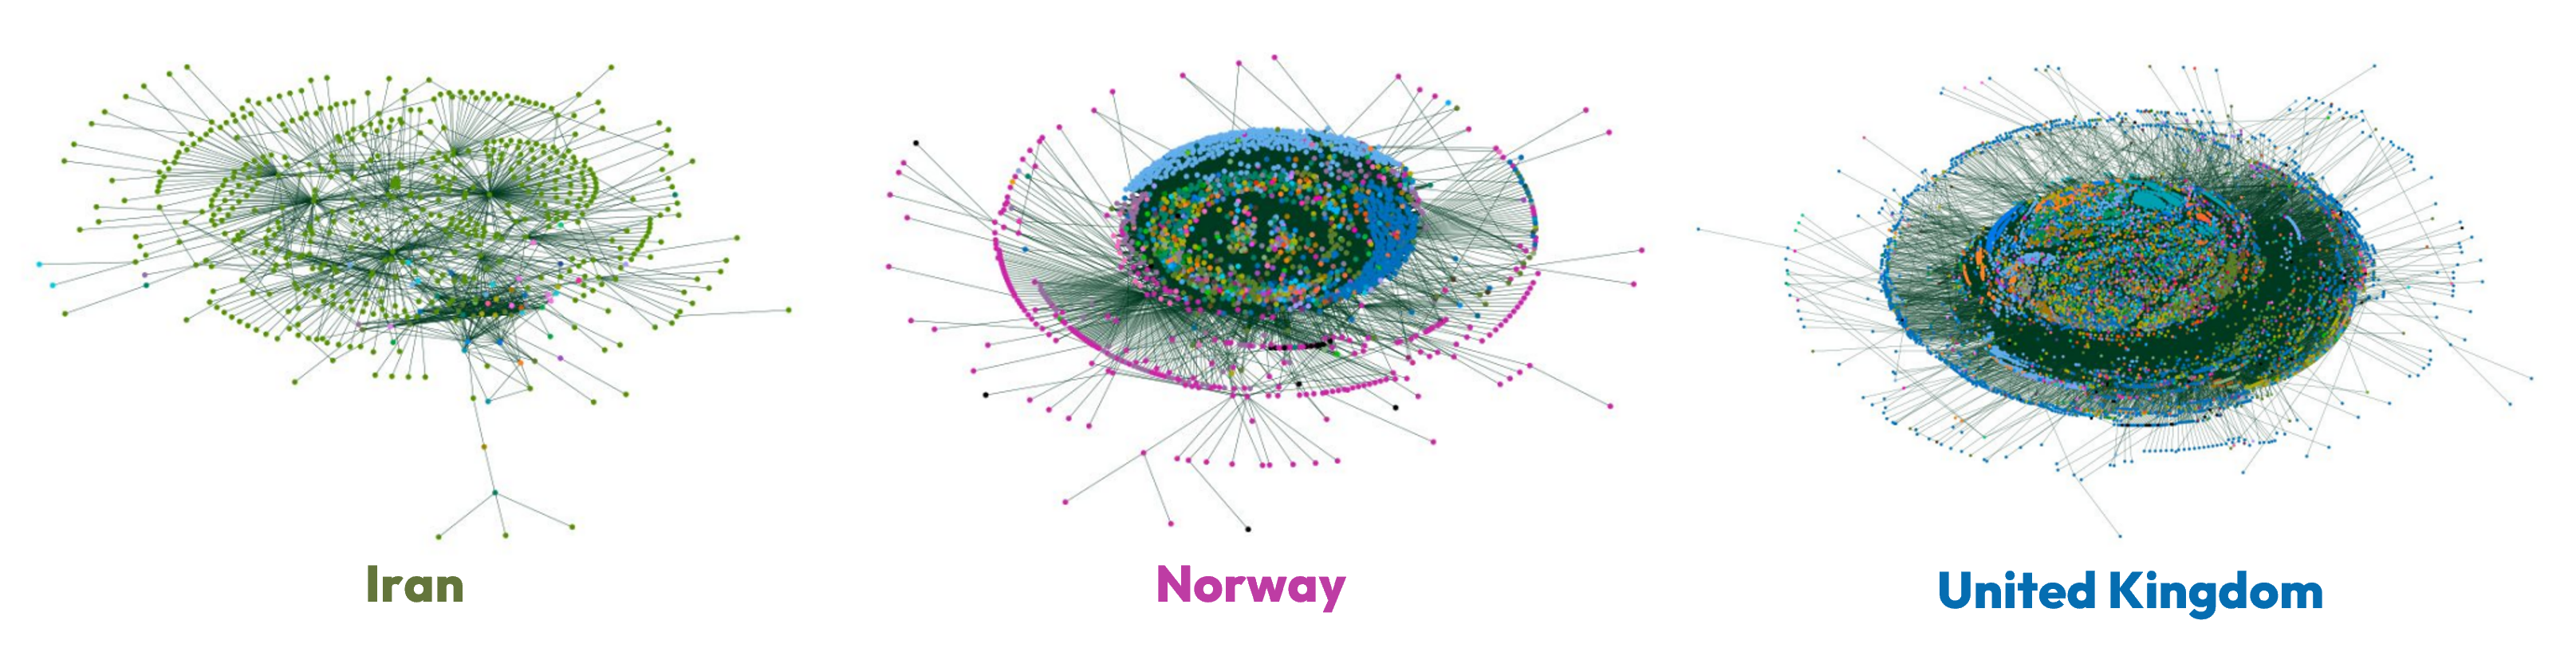 Force-directed graphs of Iran, Norway and the United Kingdom. We see similarities between Norway and the United Kingdom, for which international connectivity features centrally to the network, unlike in Iran where foreign neighbours are present only at the edge and few in number.